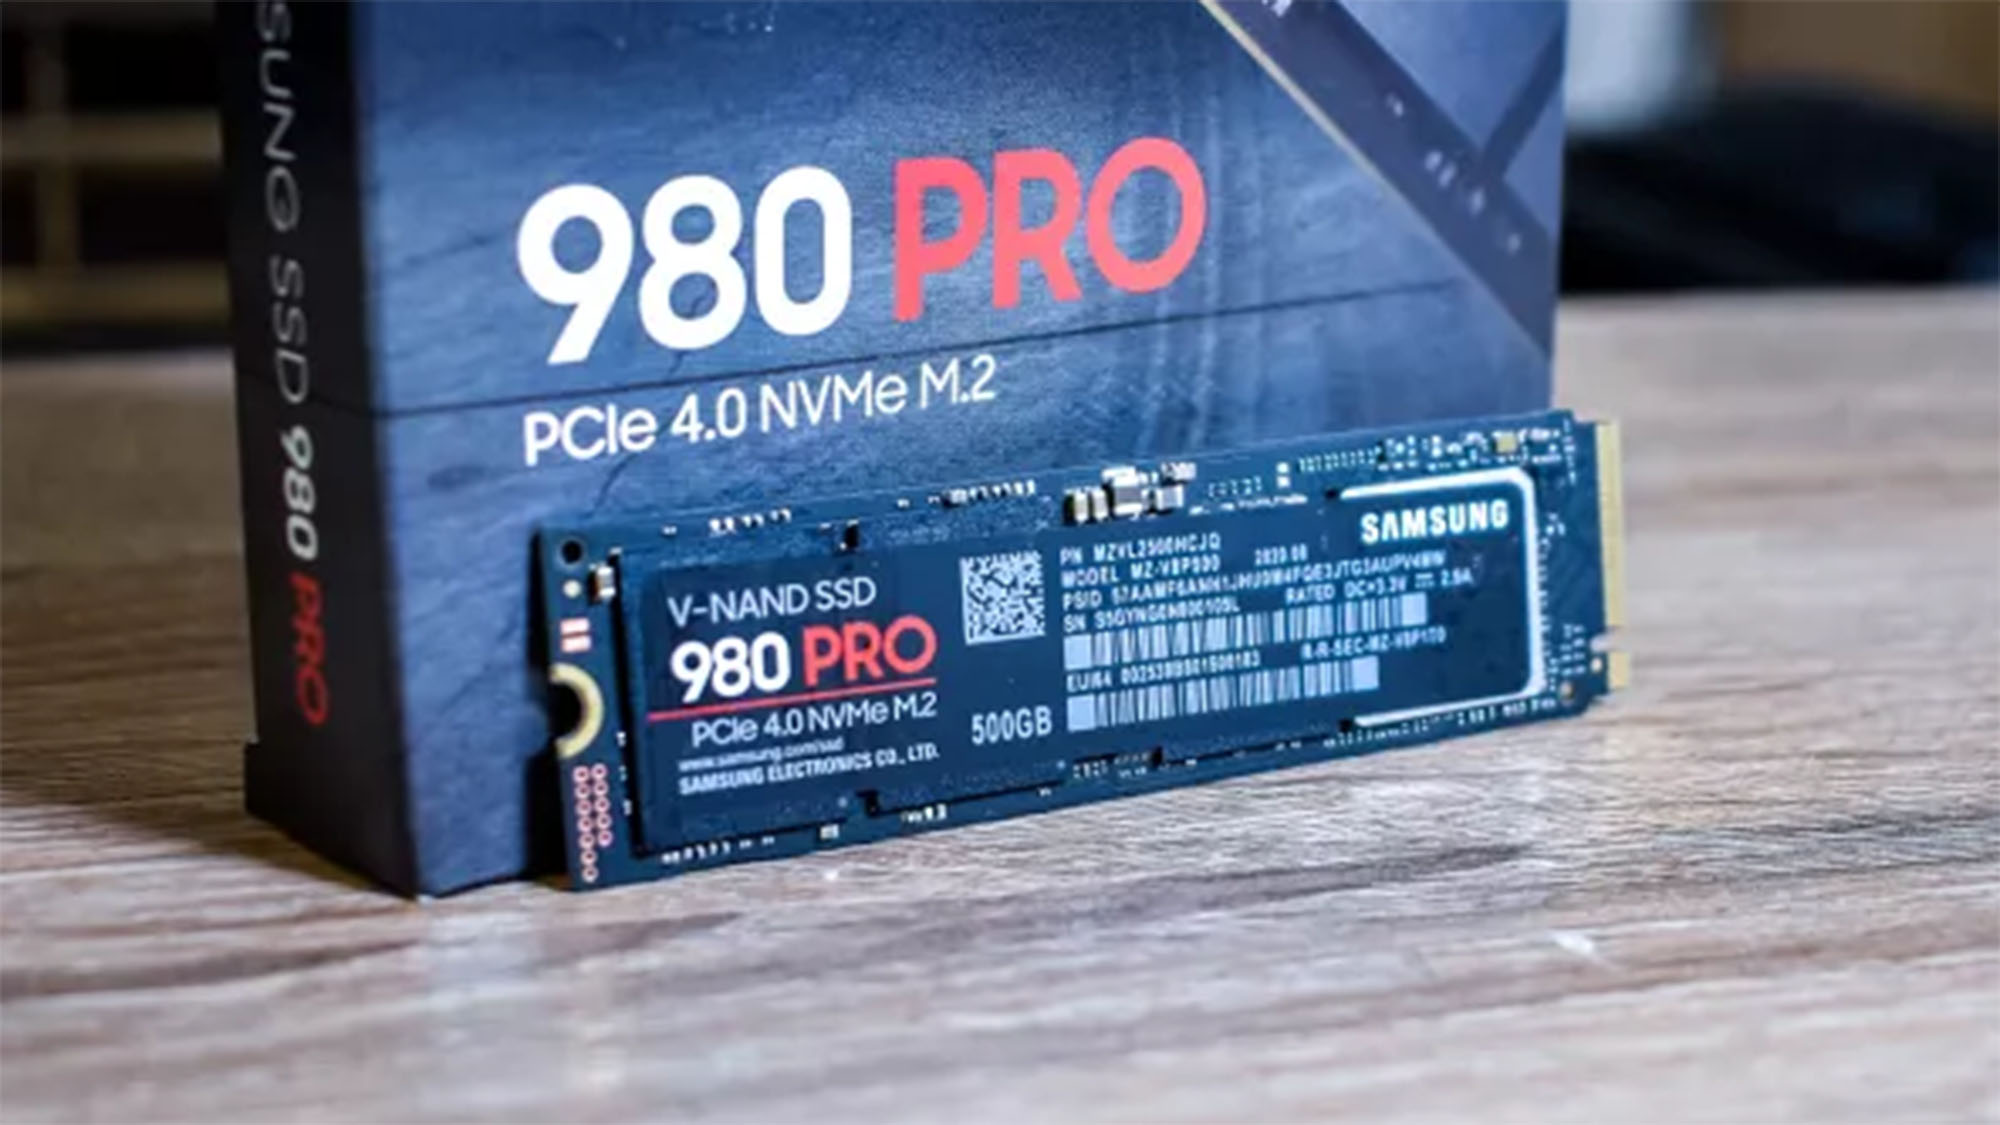 A Samsung 980 Pro SSD on a table in front of its packaging